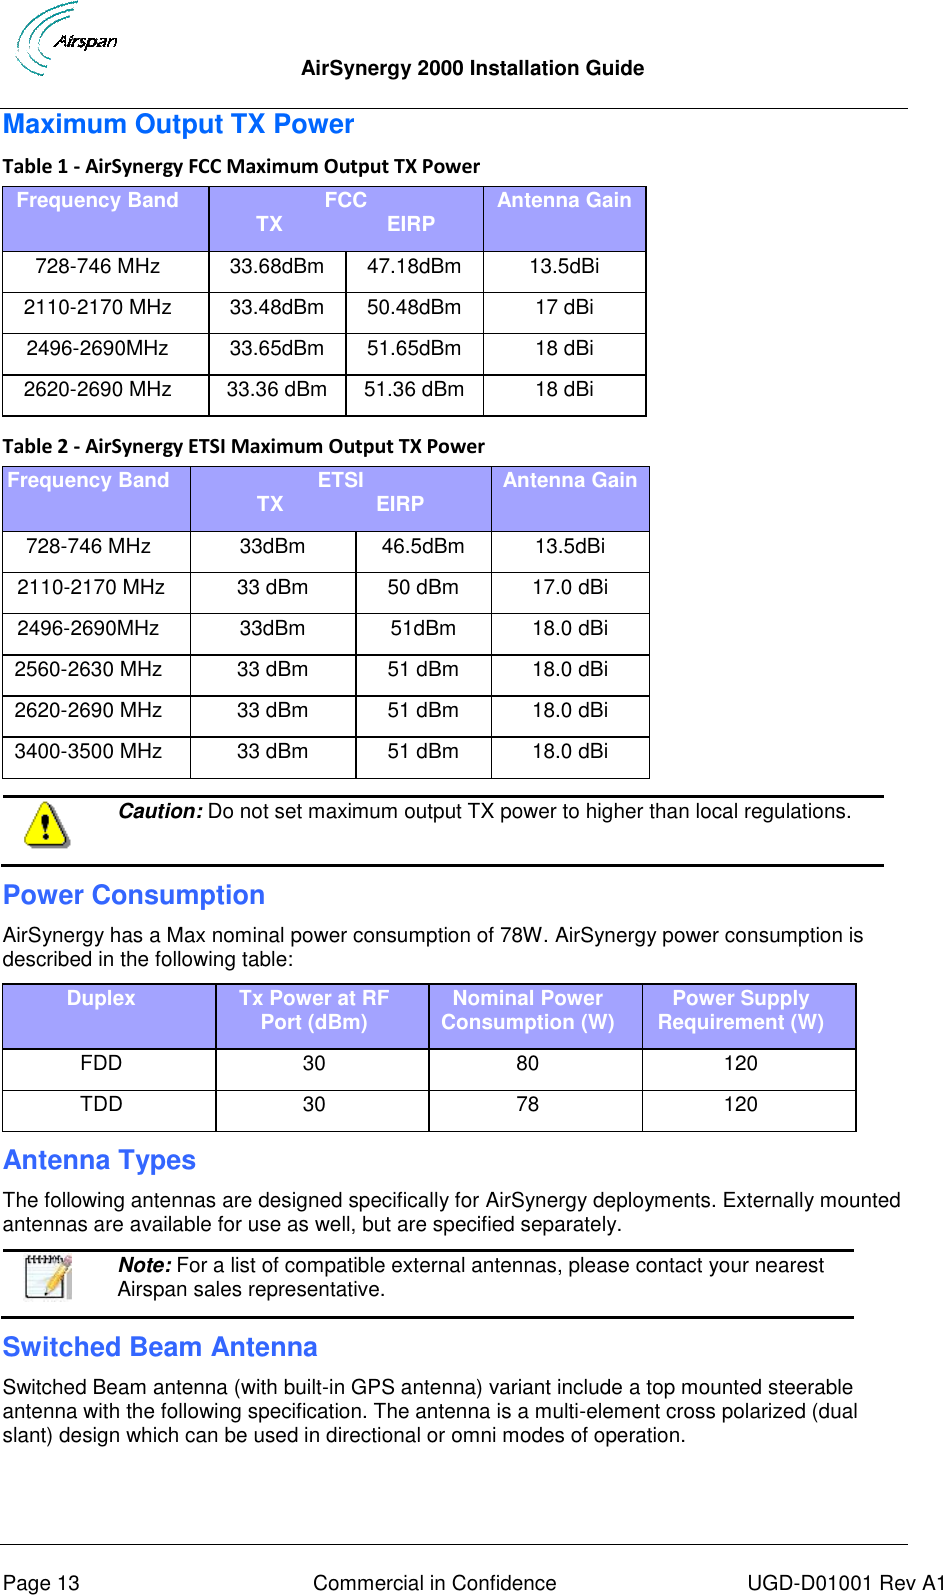  AirSynergy 2000 Installation Guide     Page 13  Commercial in Confidence  UGD-D01001 Rev A1 Maximum Output TX Power Table 1 - AirSynergy FCC Maximum Output TX Power Frequency Band FCC TX                  EIRP Antenna Gain 728-746 MHz 33.68dBm 47.18dBm 13.5dBi 2110-2170 MHz 33.48dBm 50.48dBm 17 dBi 2496-2690MHz 33.65dBm 51.65dBm 18 dBi 2620-2690 MHz 33.36 dBm 51.36 dBm 18 dBi  Table 2 - AirSynergy ETSI Maximum Output TX Power Frequency Band ETSI TX                EIRP Antenna Gain 728-746 MHz 33dBm 46.5dBm 13.5dBi  2110-2170 MHz 33 dBm 50 dBm 17.0 dBi 2496-2690MHz 33dBm 51dBm 18.0 dBi 2560-2630 MHz 33 dBm 51 dBm 18.0 dBi 2620-2690 MHz 33 dBm 51 dBm 18.0 dBi 3400-3500 MHz 33 dBm 51 dBm 18.0 dBi   Caution: Do not set maximum output TX power to higher than local regulations. Power Consumption AirSynergy has a Max nominal power consumption of 78W. AirSynergy power consumption is described in the following table: Duplex Tx Power at RF Port (dBm) Nominal Power Consumption (W) Power Supply Requirement (W) FDD 30 80 120 TDD 30 78 120 Antenna Types The following antennas are designed specifically for AirSynergy deployments. Externally mounted antennas are available for use as well, but are specified separately.  Note: For a list of compatible external antennas, please contact your nearest Airspan sales representative. Switched Beam Antenna Switched Beam antenna (with built-in GPS antenna) variant include a top mounted steerable antenna with the following specification. The antenna is a multi-element cross polarized (dual slant) design which can be used in directional or omni modes of operation.   